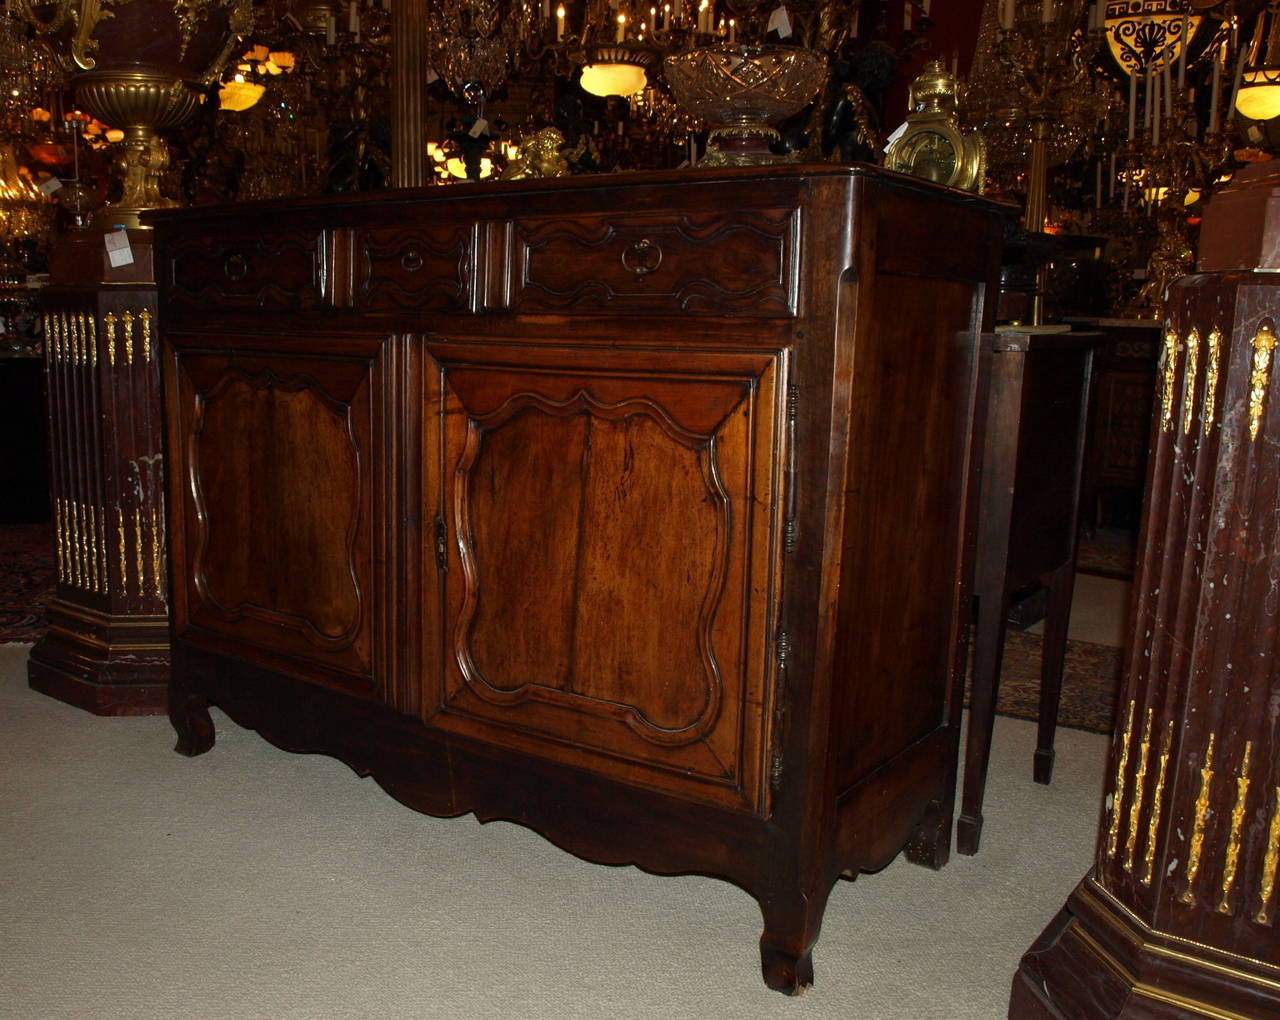 A very elegant antique French buffet